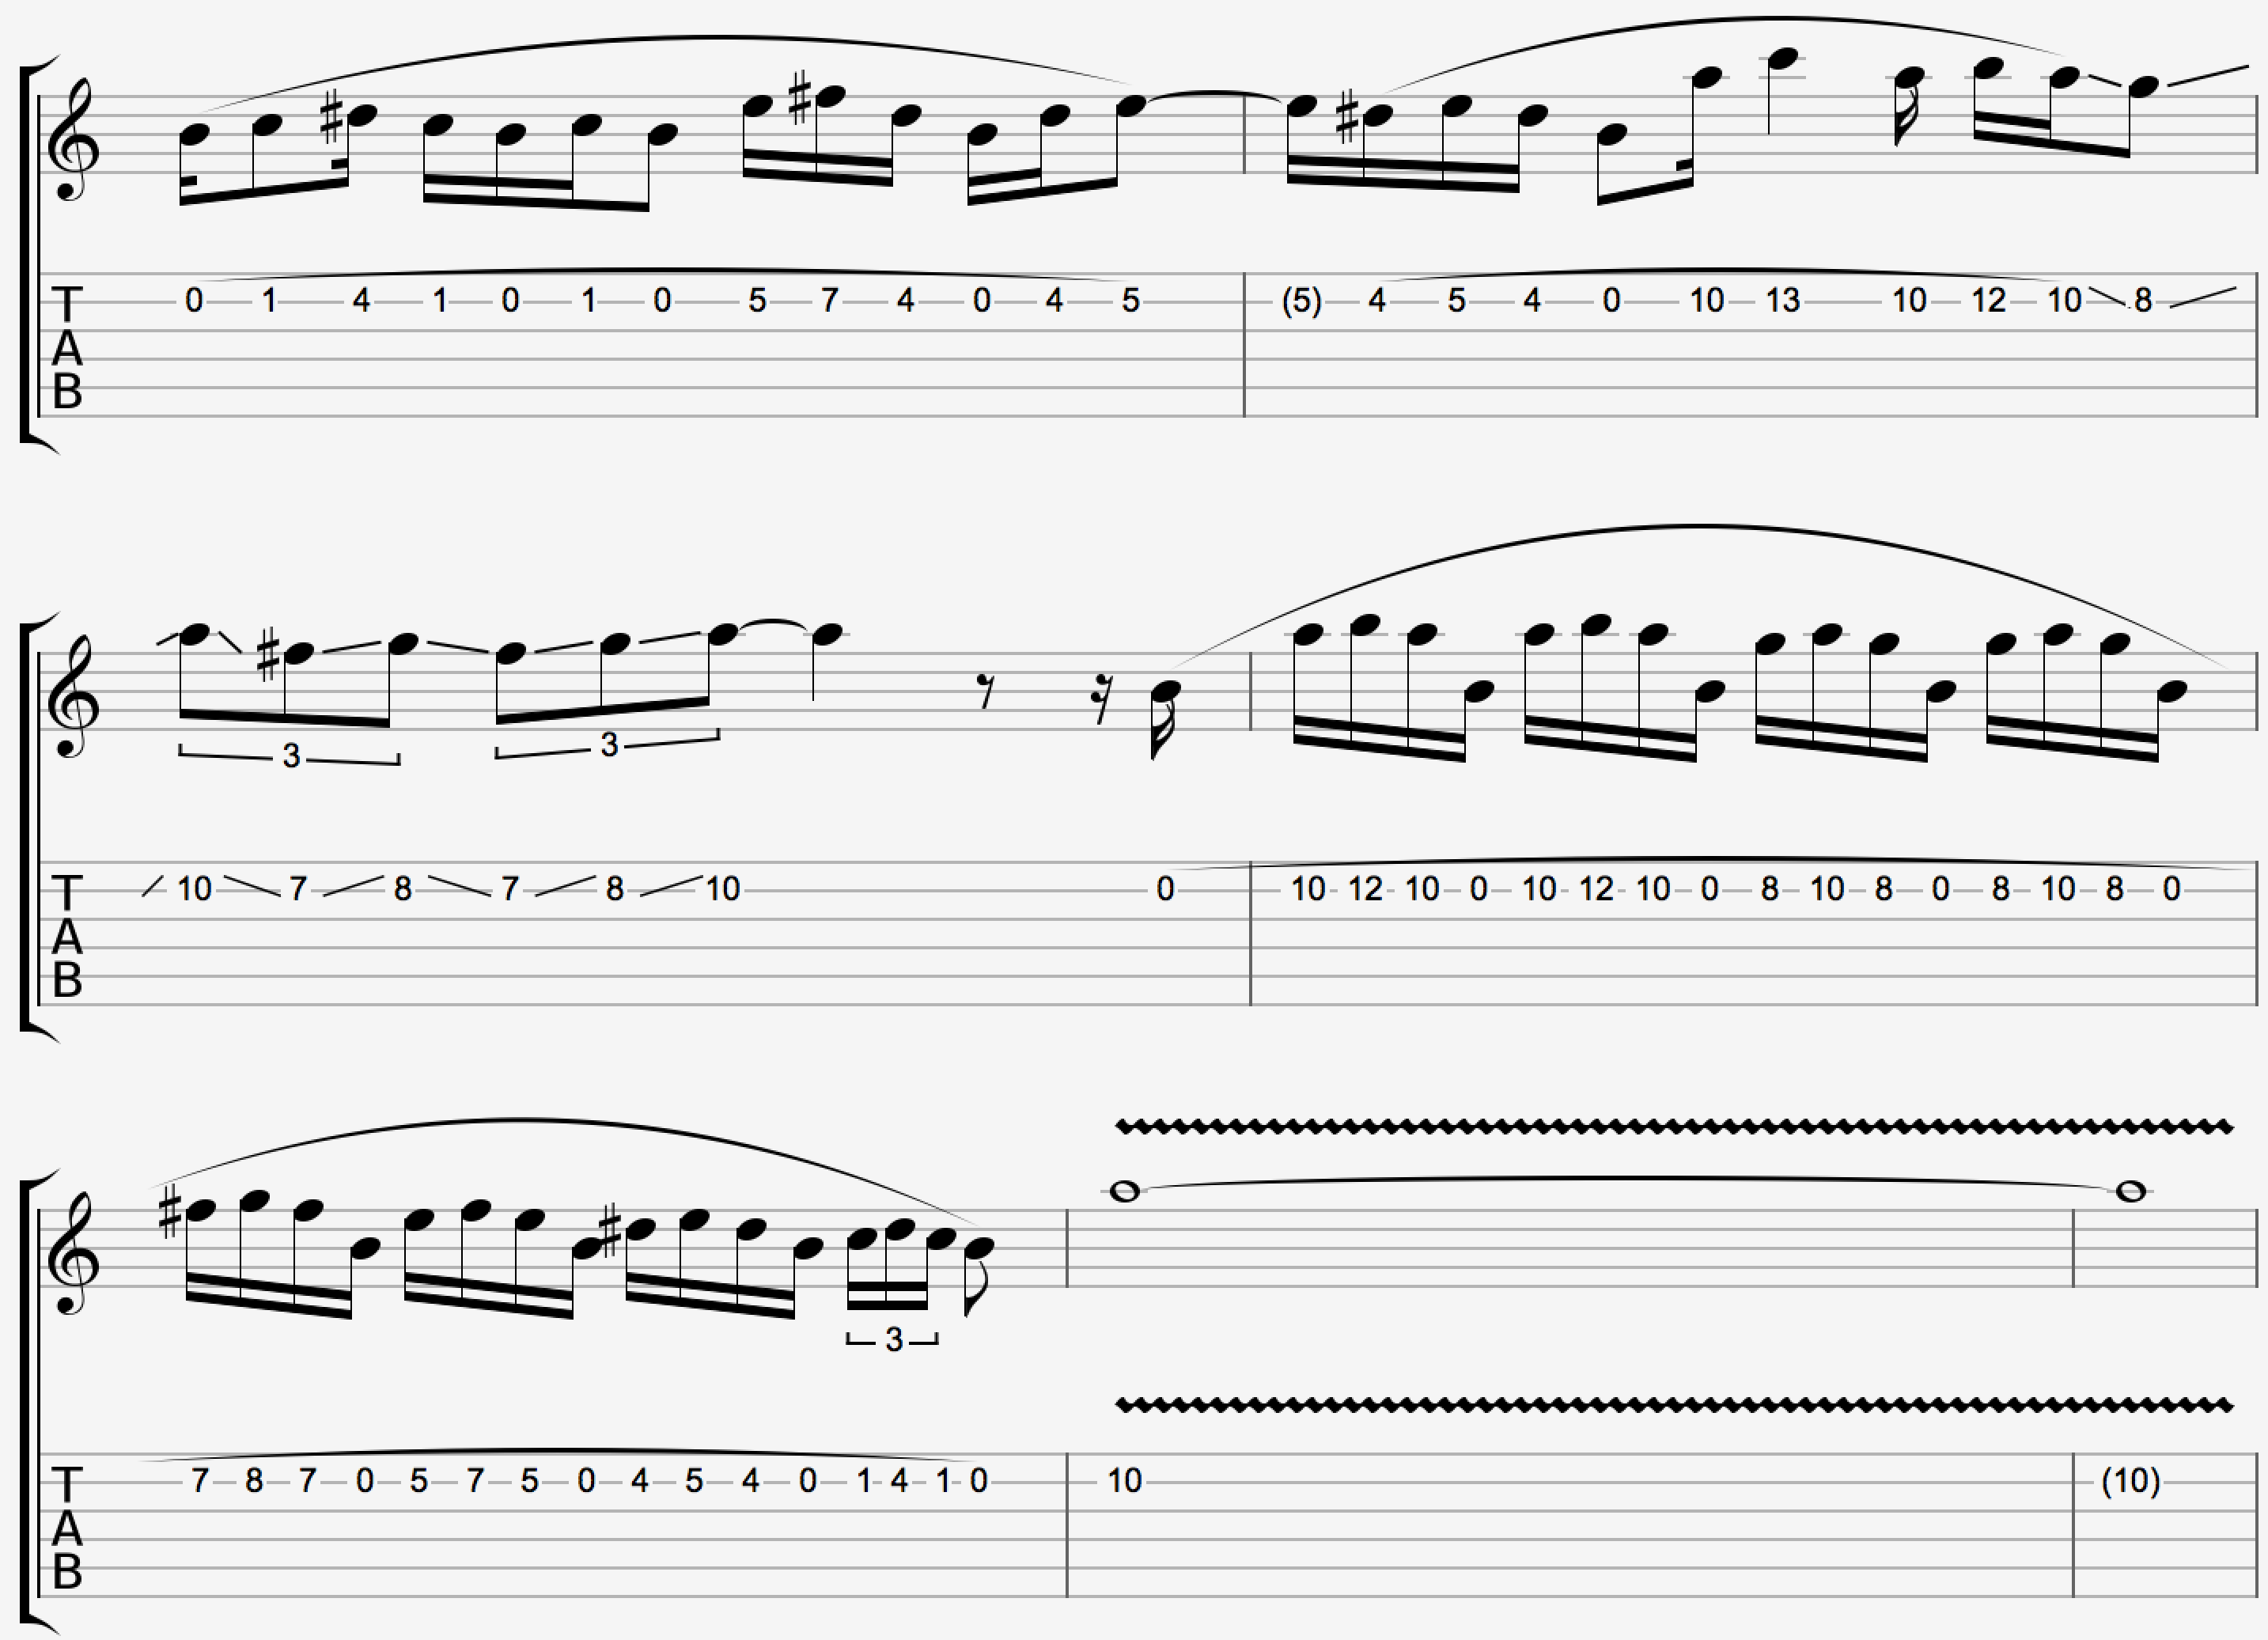 This is the part of Alex Lifeson's guitar solo in the song YYZ, where he incorporates open-string pedal point lines